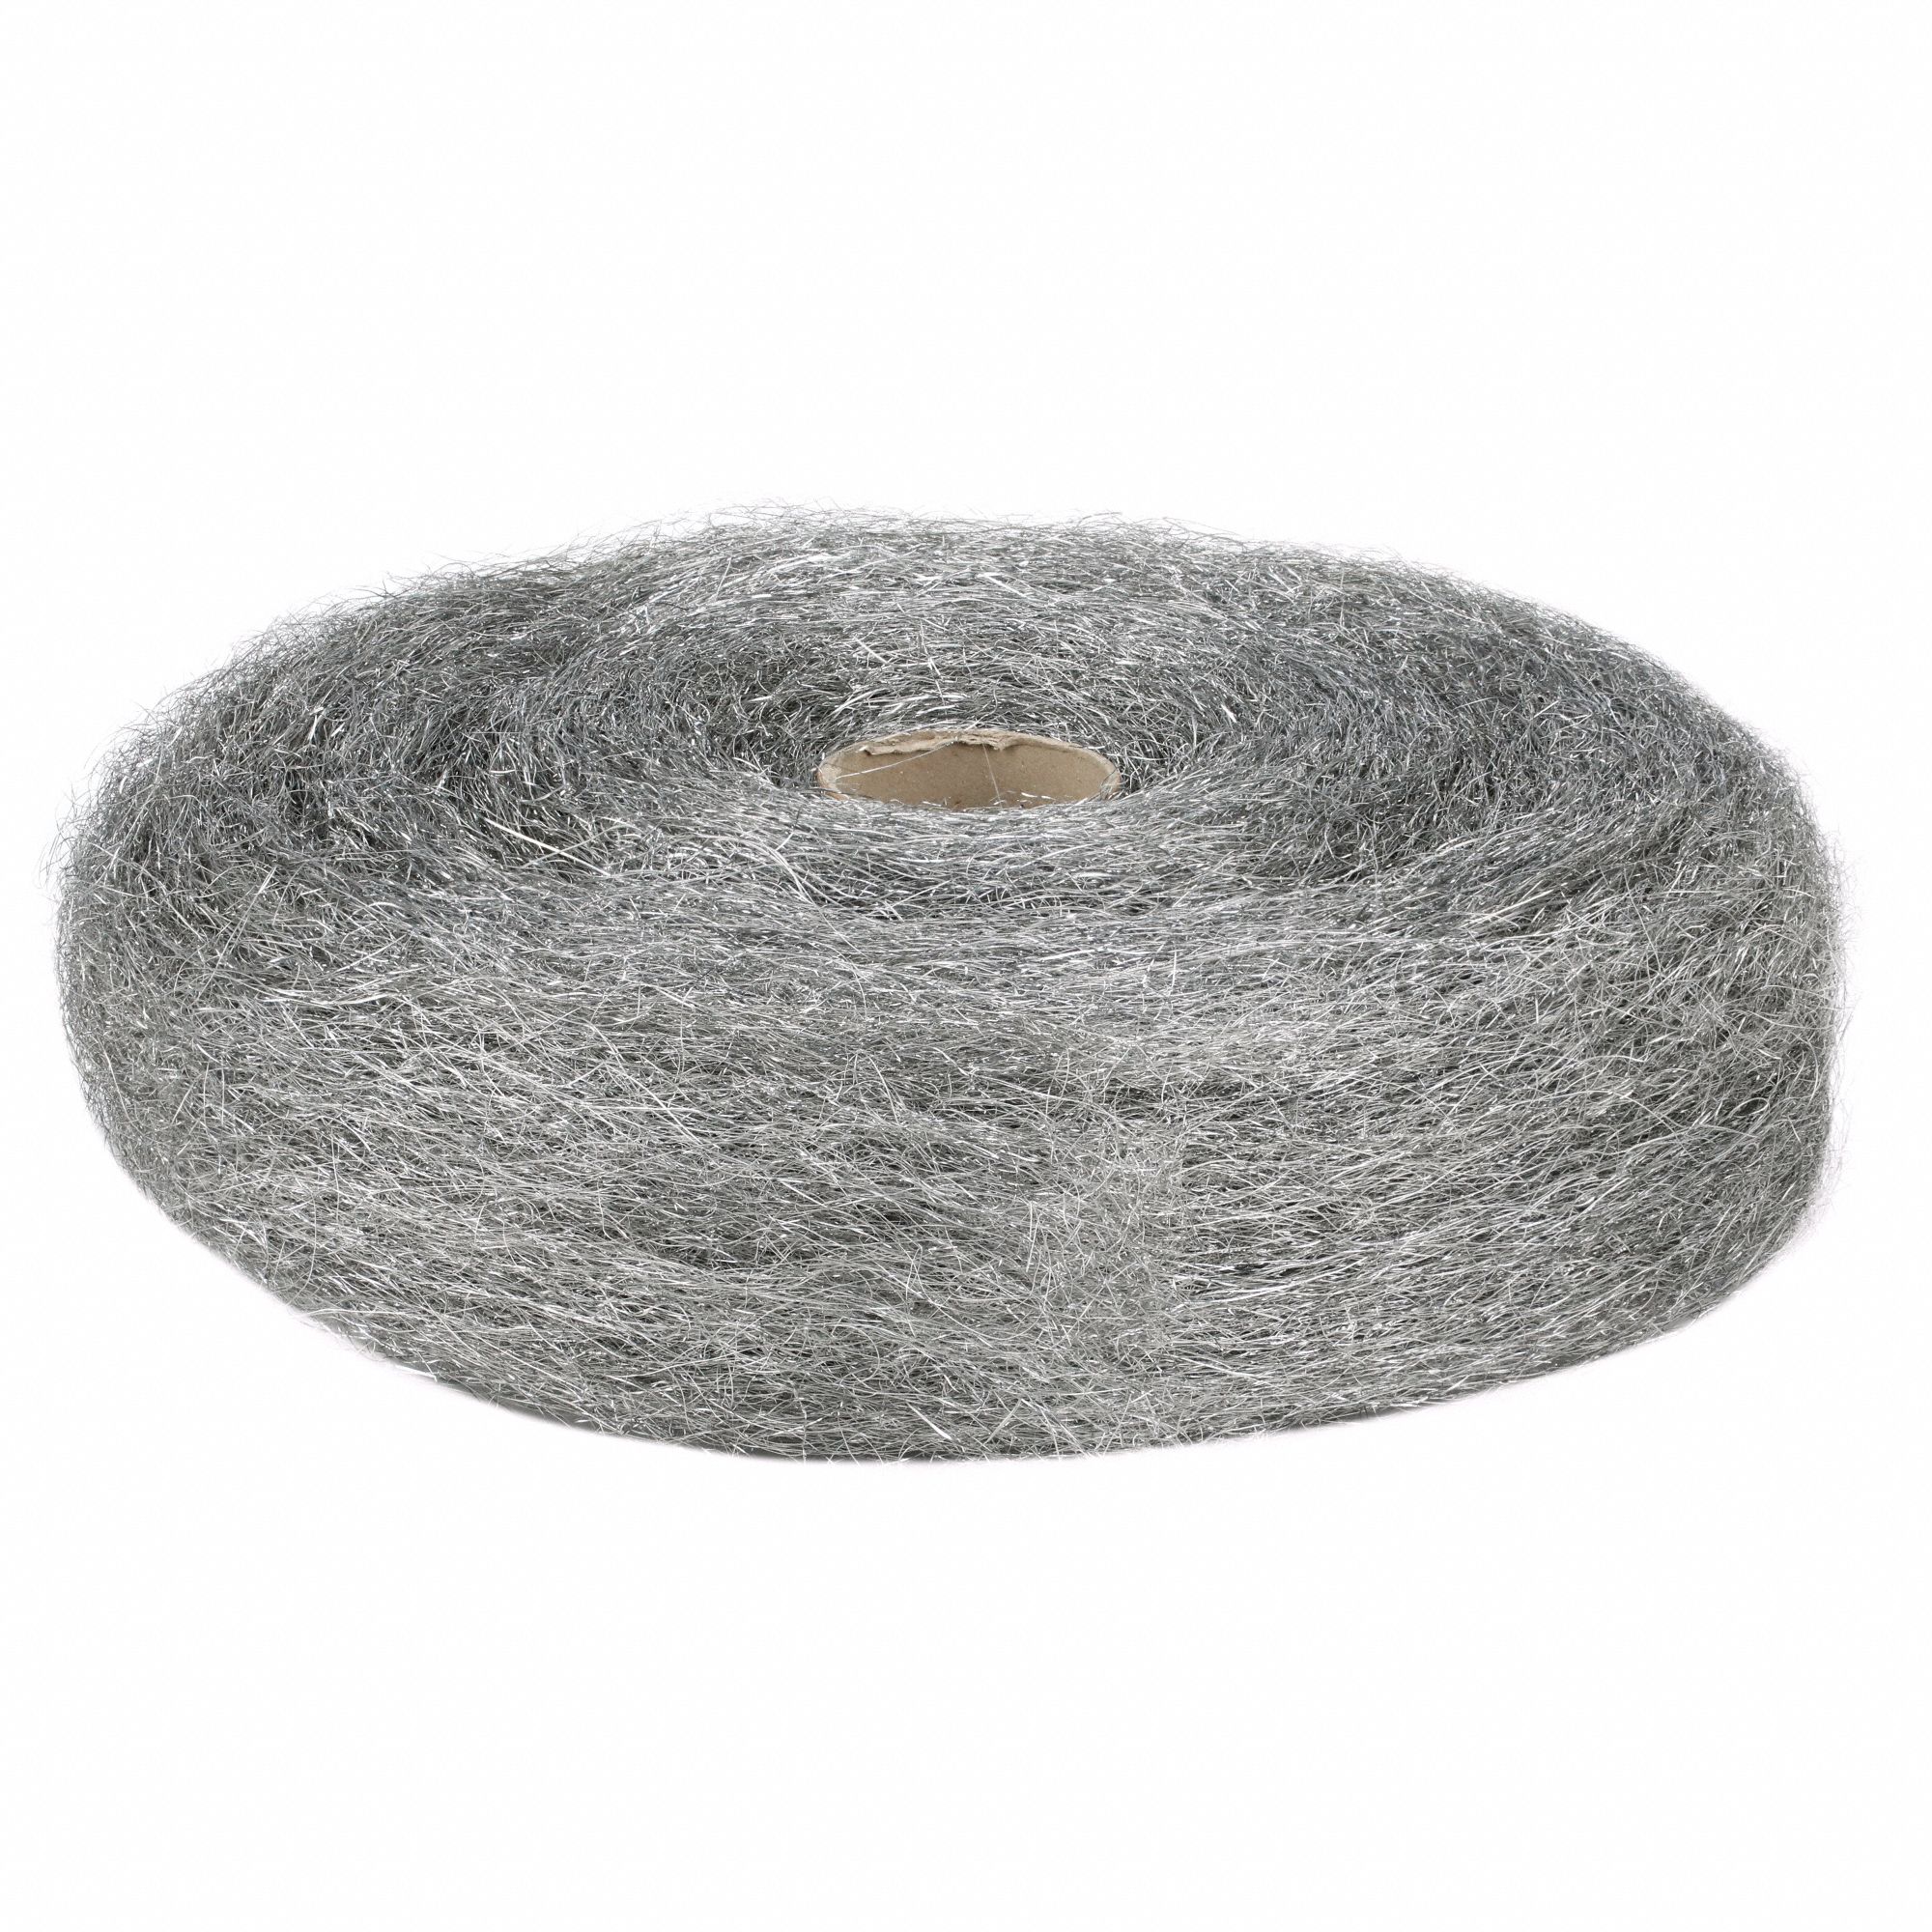 AISI 316L Stainless Steel Wool 5 LB Rolls